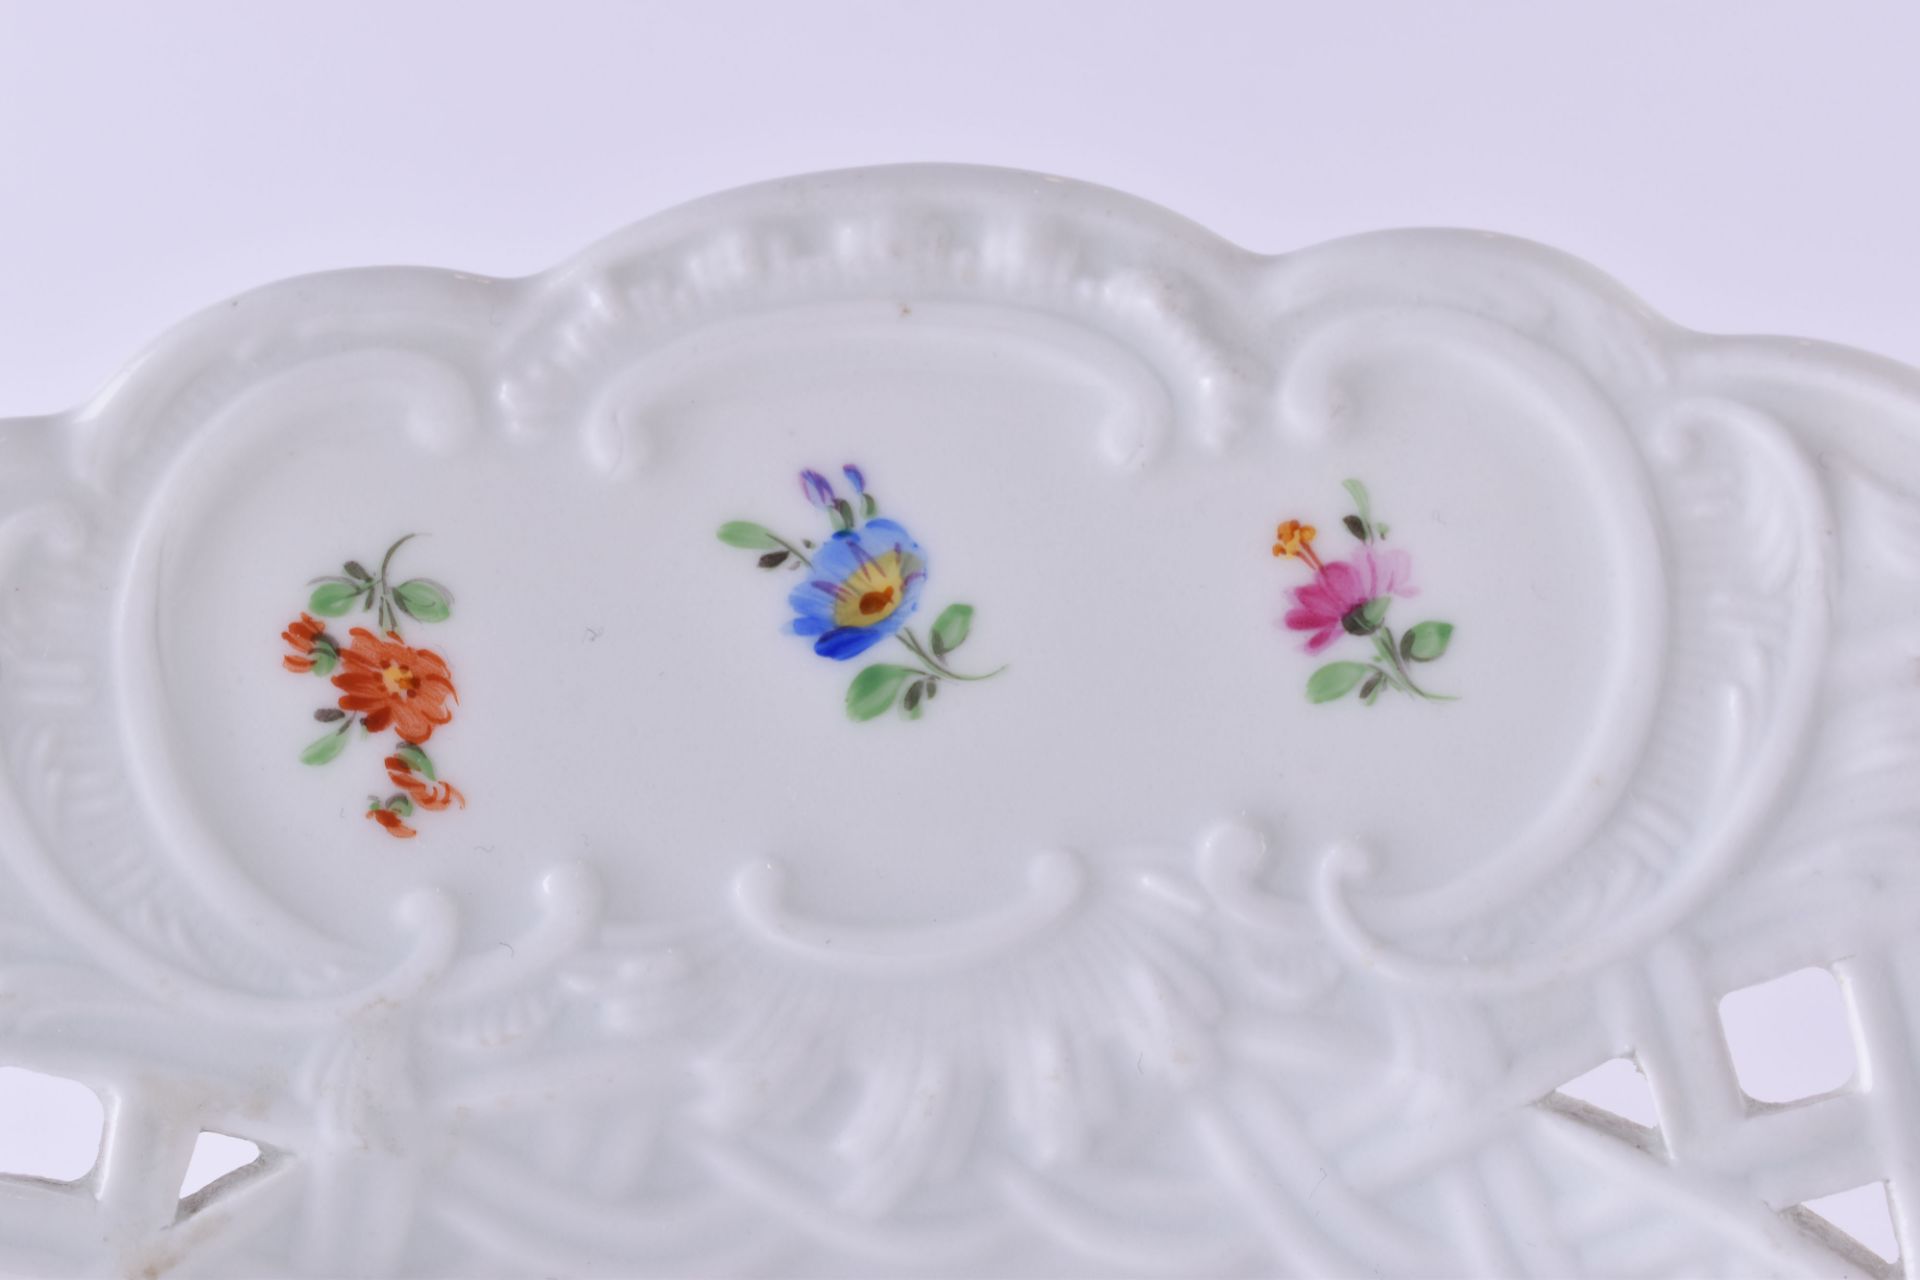 Plate Meissen 19th century - Image 3 of 4